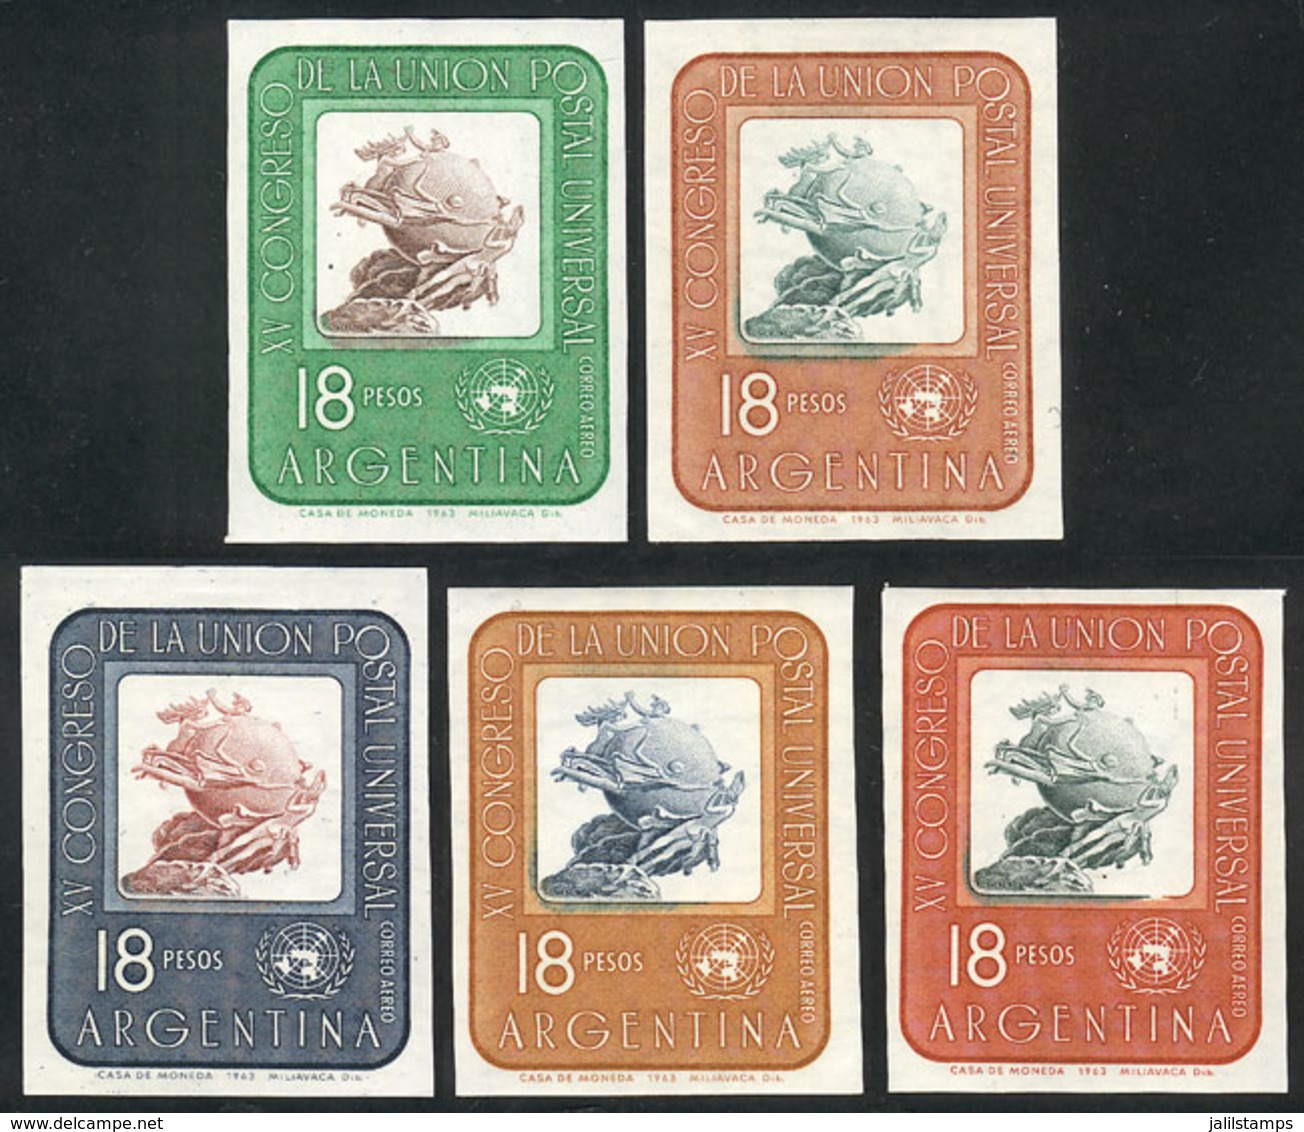 ARGENTINA: GJ.1278, 1964 UPU Congress, 5 Imperforate TRIAL COLOR PROOFS, Printed On Gummed Paper With Watermark, VF Qual - Luftpost